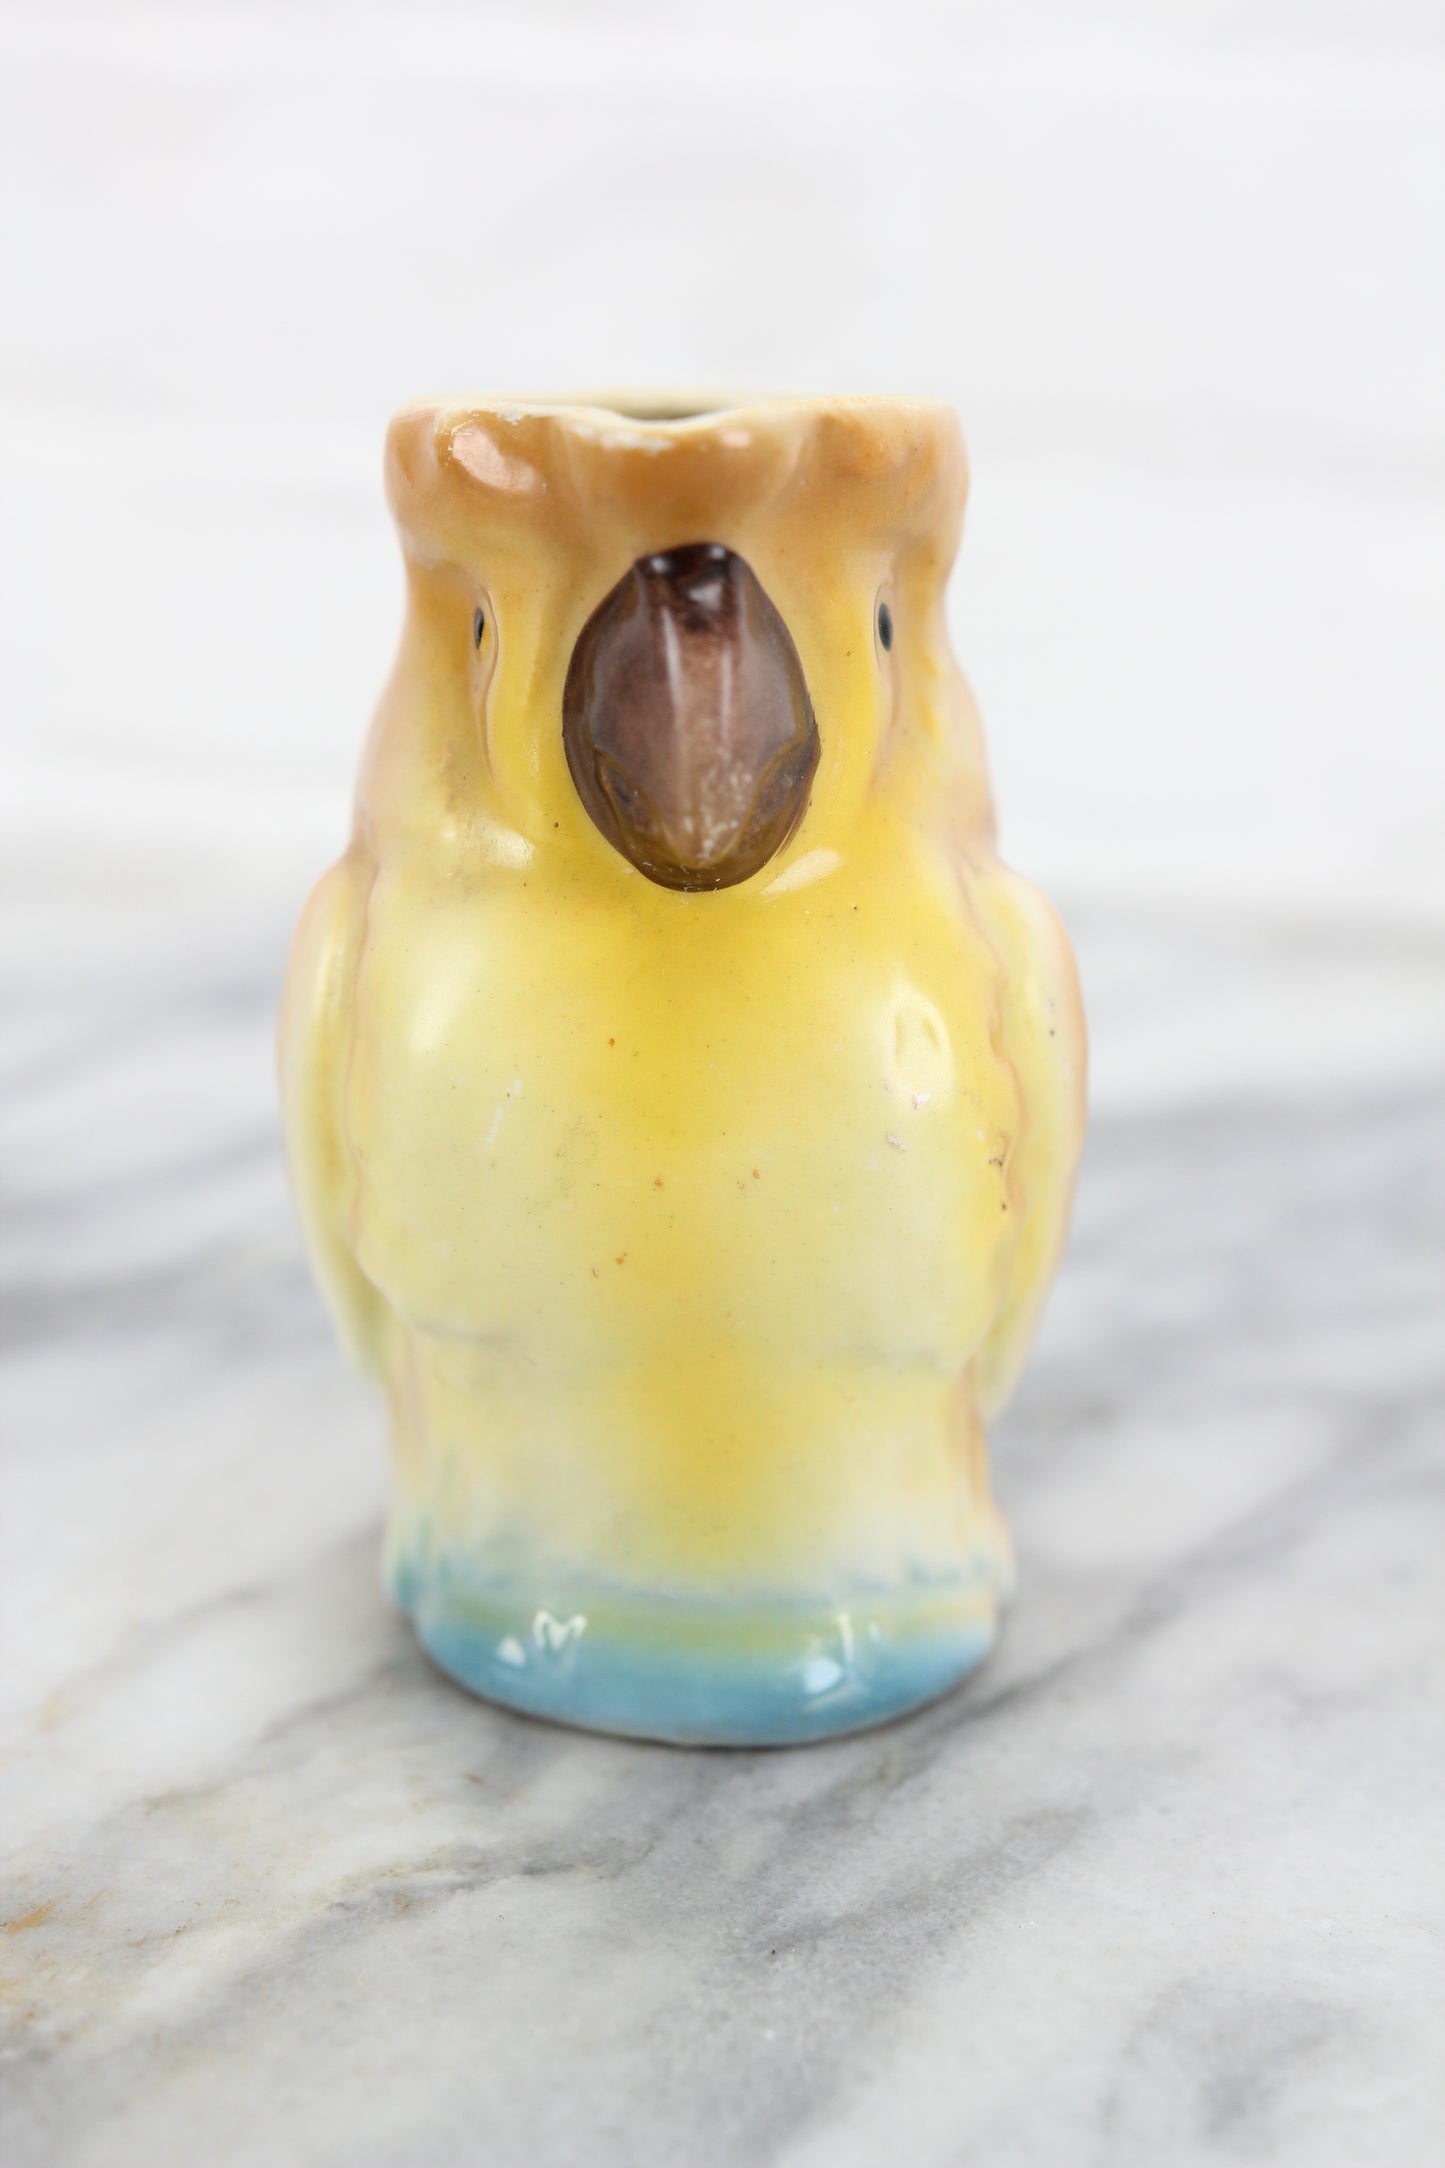 Porcelain Parrot Shaped Creamer, Made in Czechoslovakia